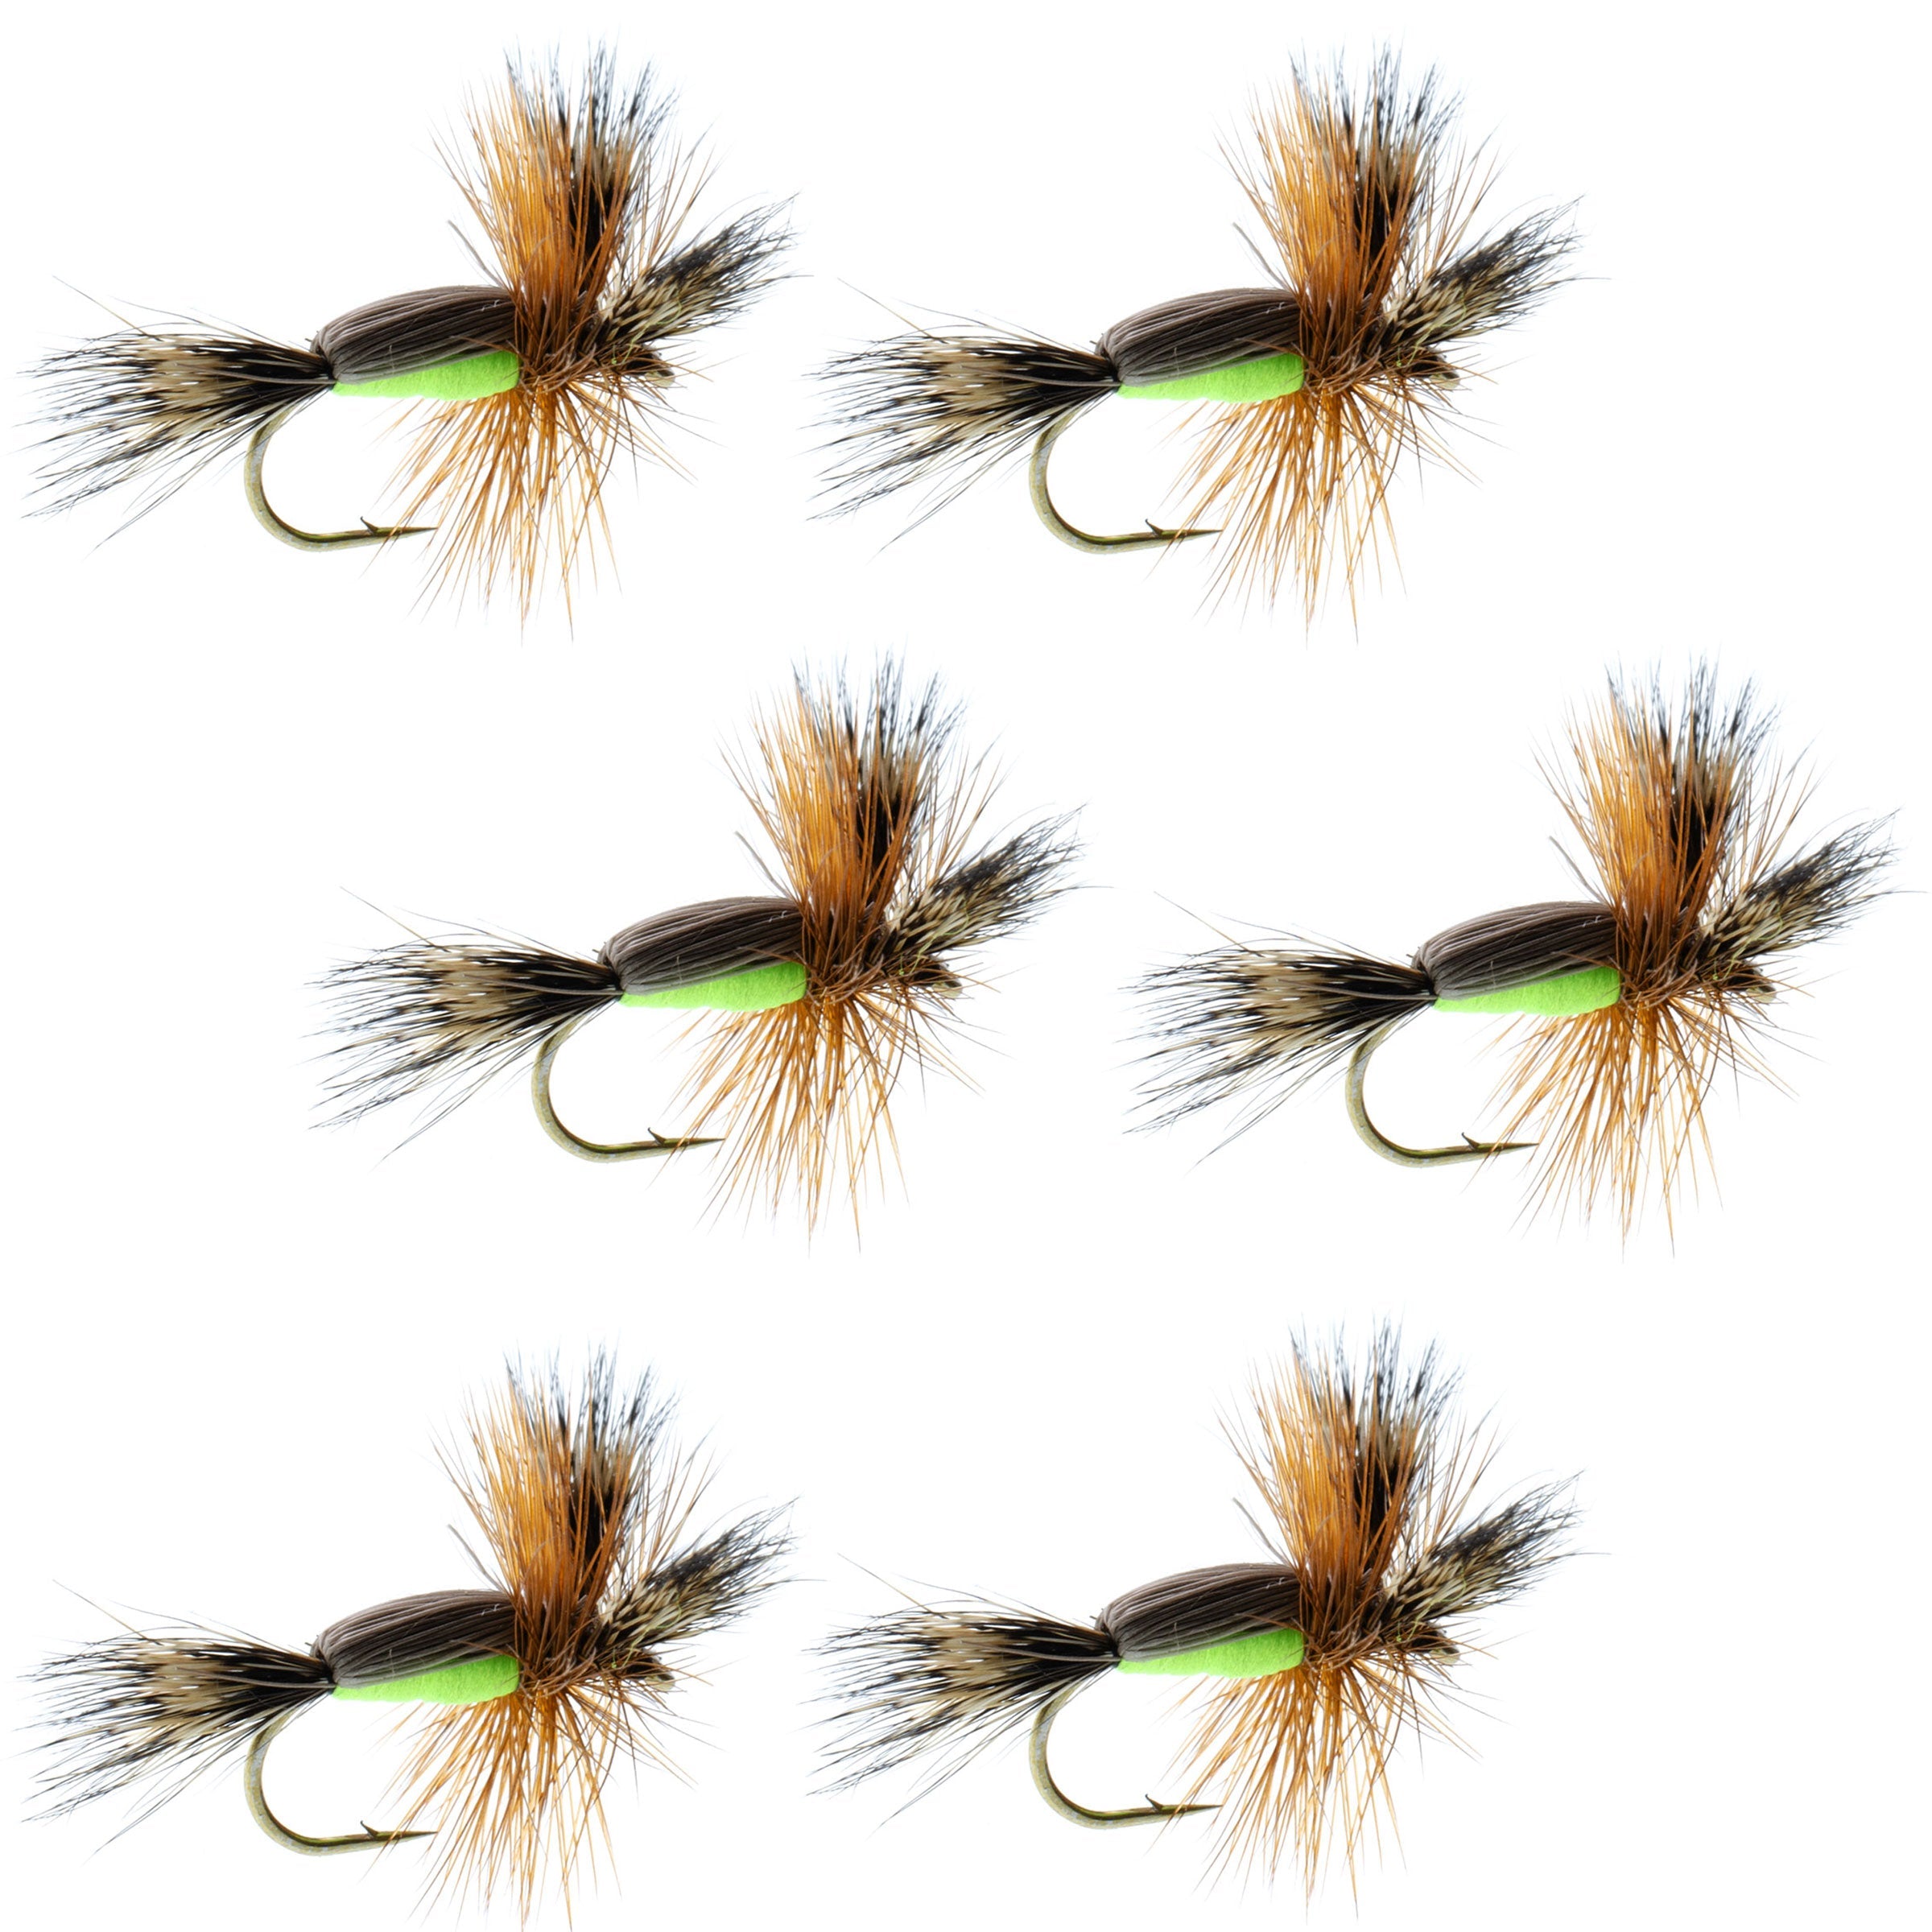 Chartreuse Humpy Classic Hair Wing Dry Fly - Gancho para 6 moscas, tamaño 14